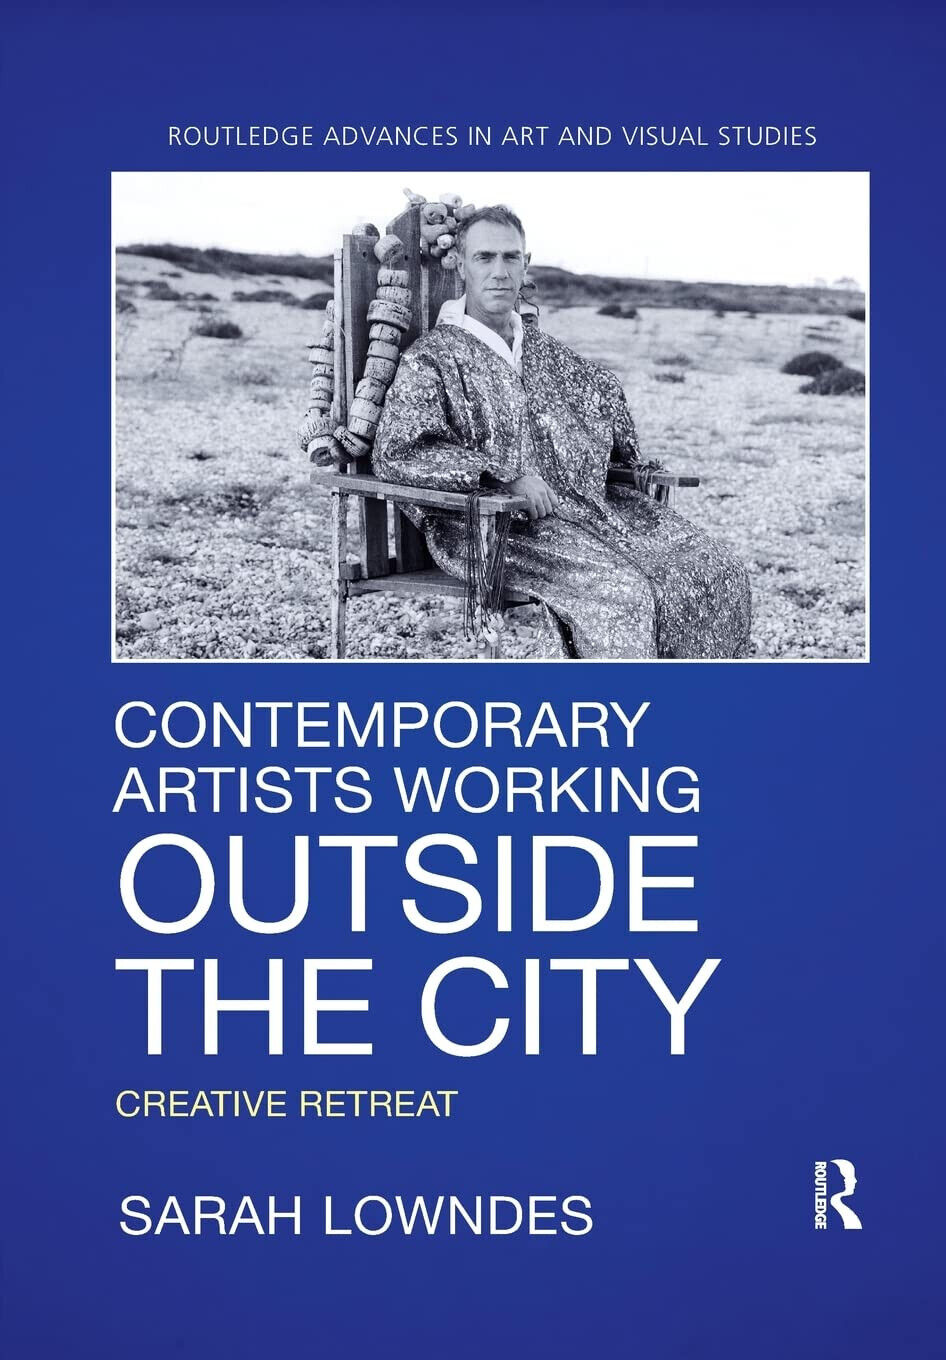 Contemporary Artists Working Outside The City - Sarah Lowndes - Routledge, 2021